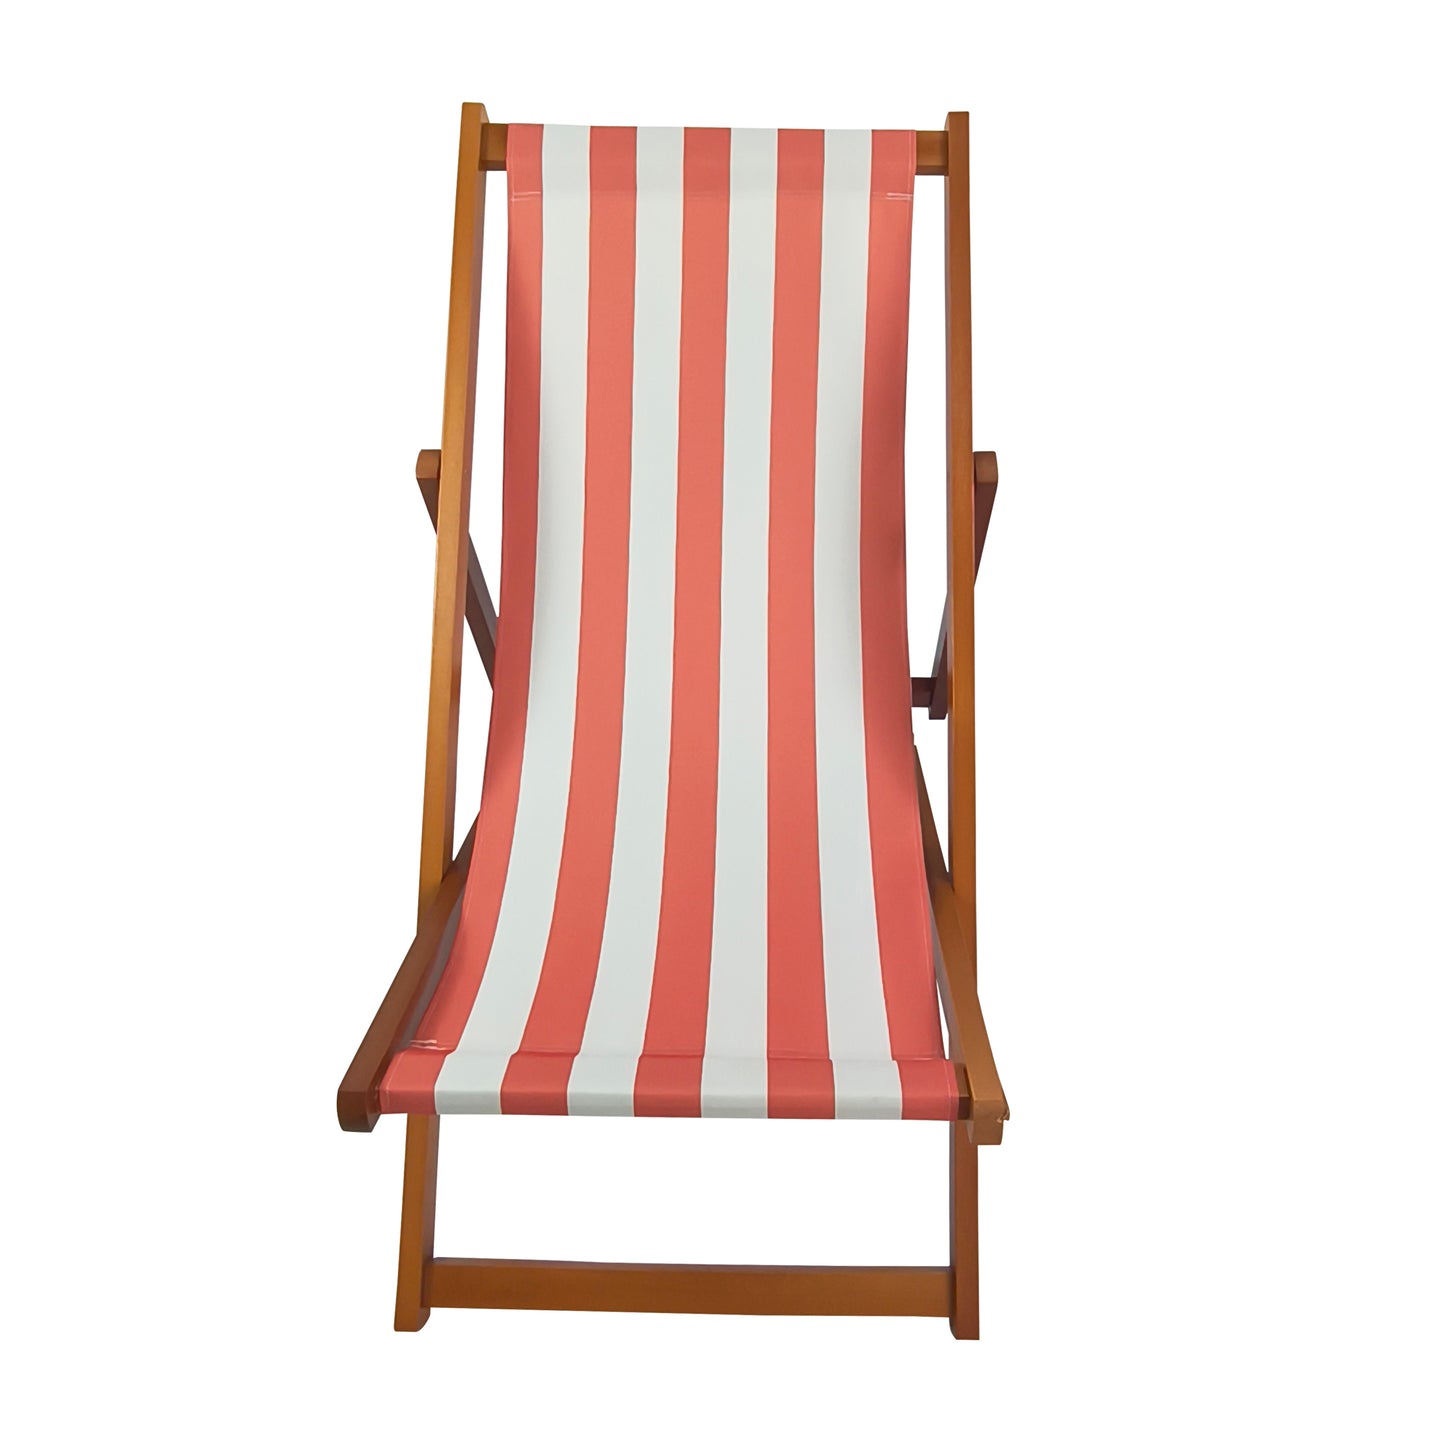 Outdoor/ beach /swimming pool /populus wood sling chair  Orange Stripe （color:Orange ）folding chaise lounge chair